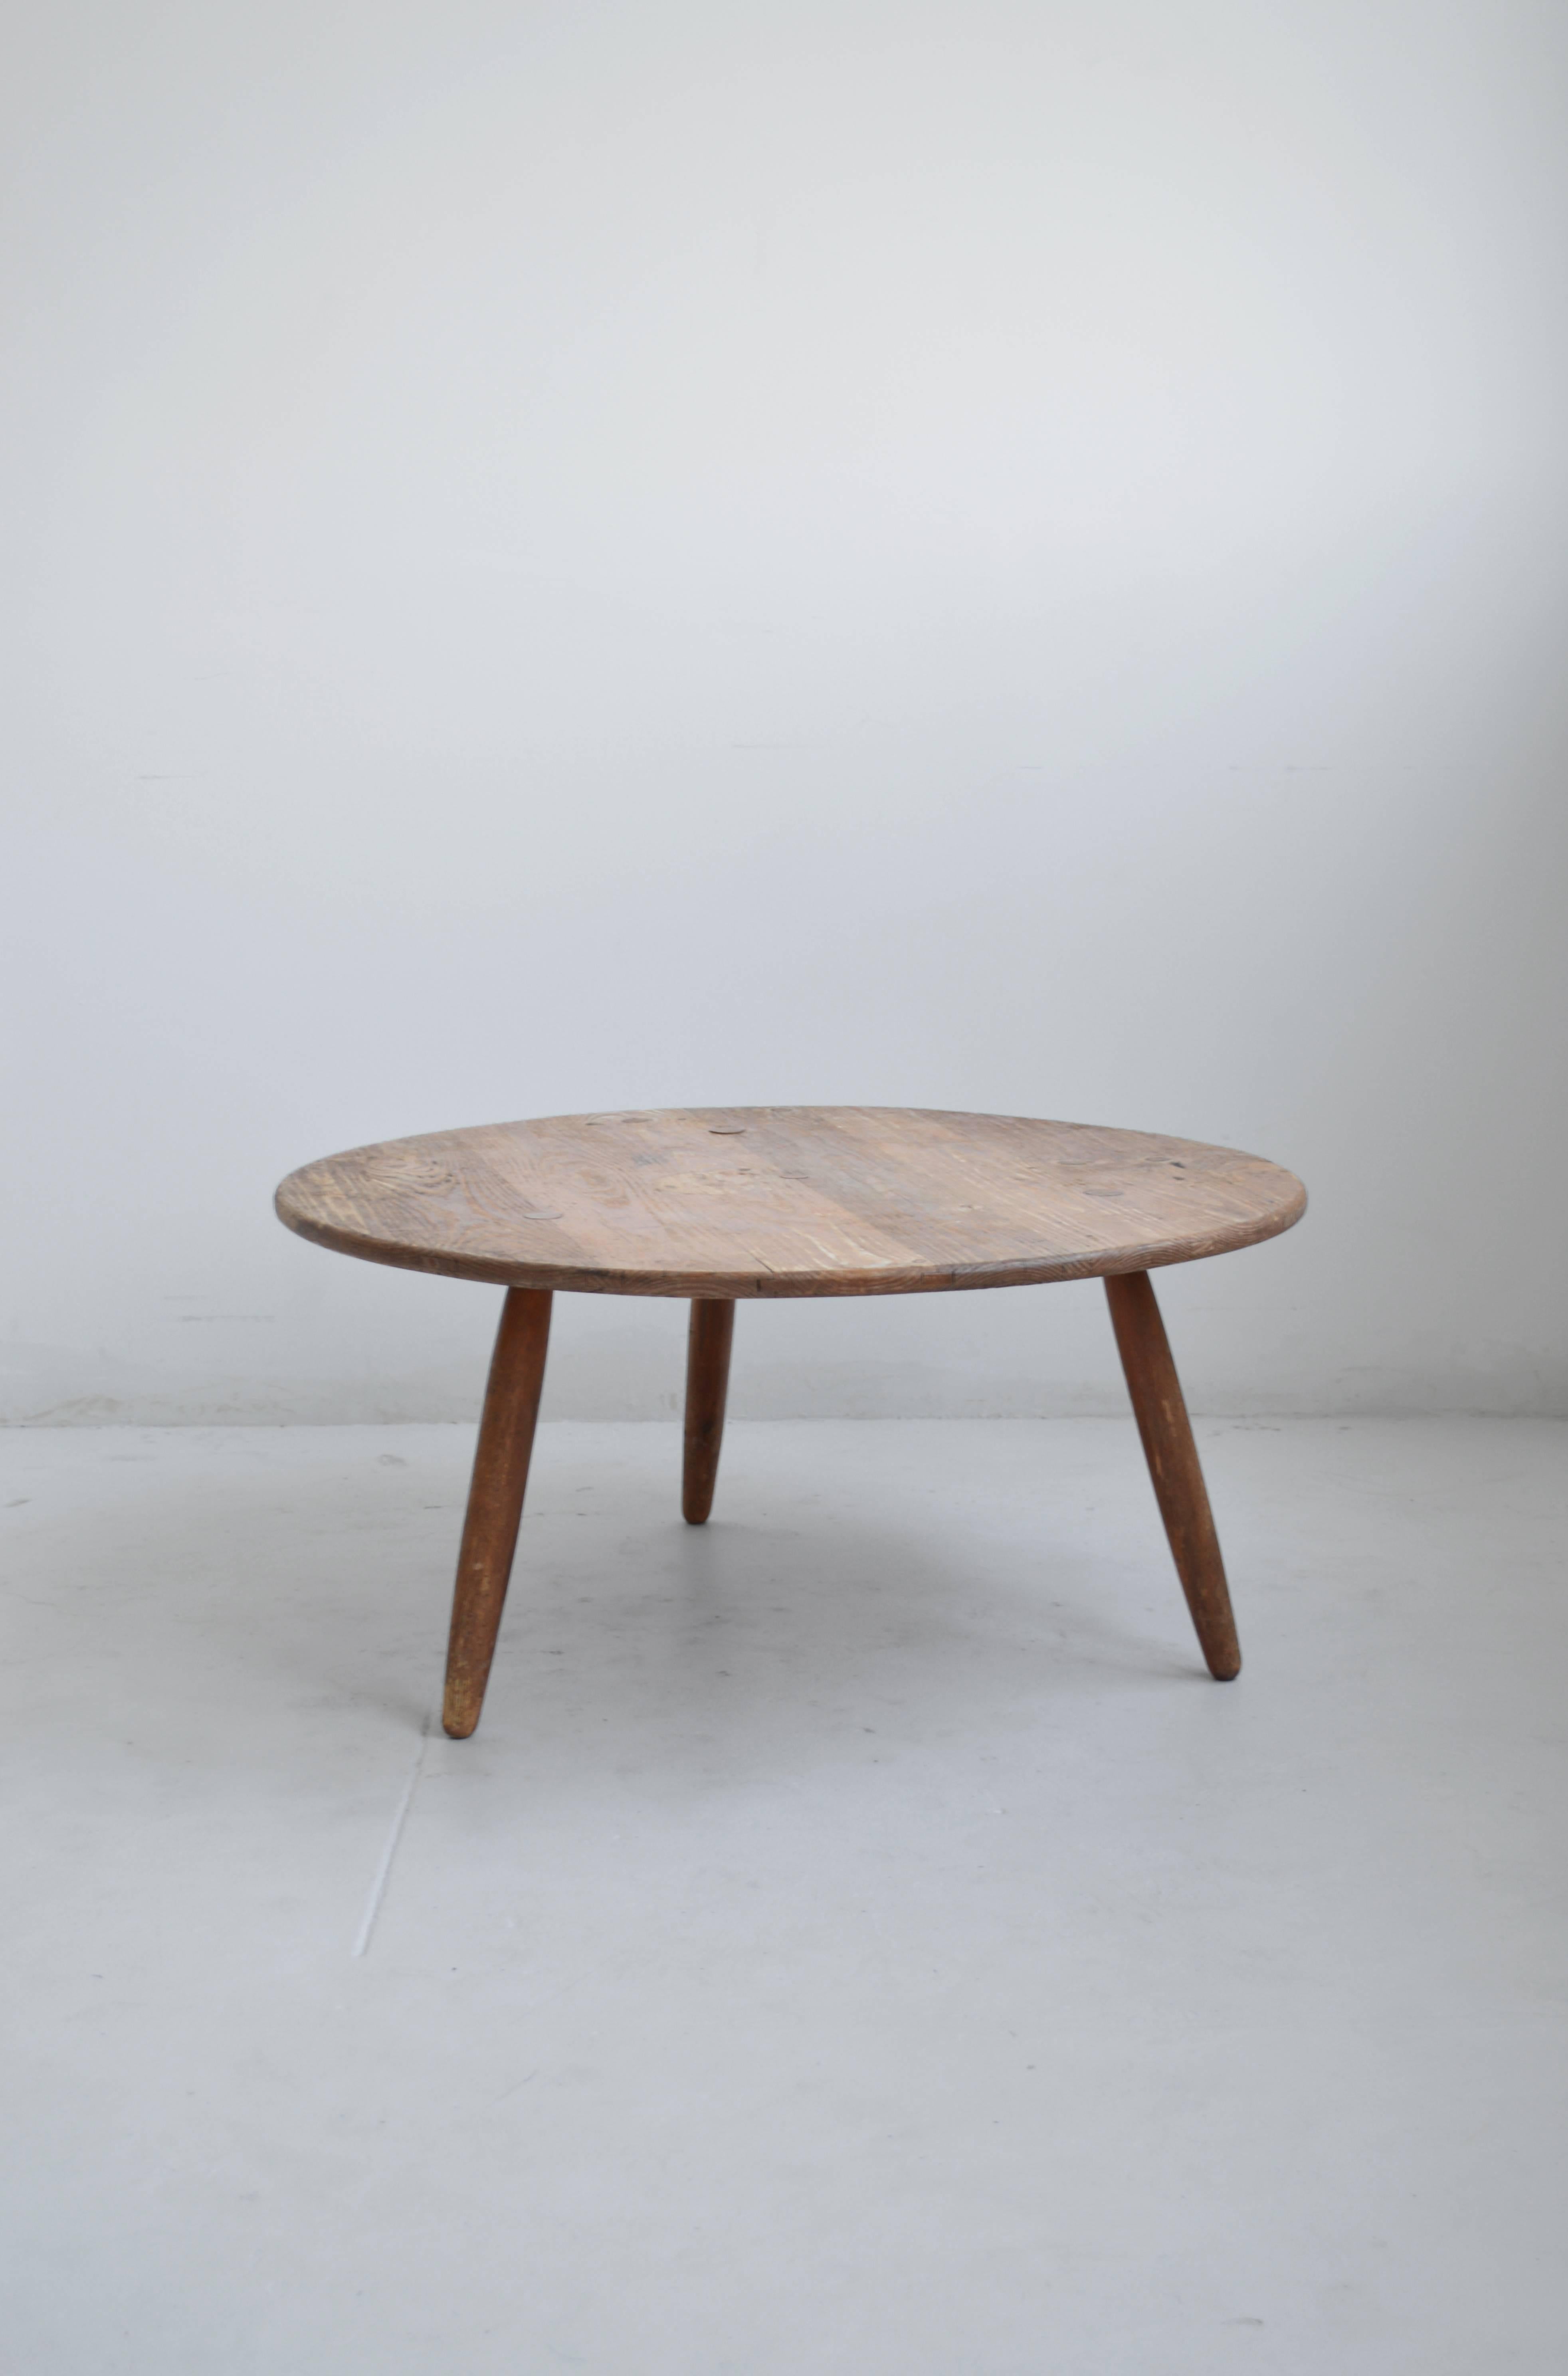 Beautiful Mid-Century coffee table attributed to the iconic French designer Charlotte Perriand. In good vintage condition, this charming coffee or cocktail table features three solid wood legs and a round top with a lovely patina and visible wear.